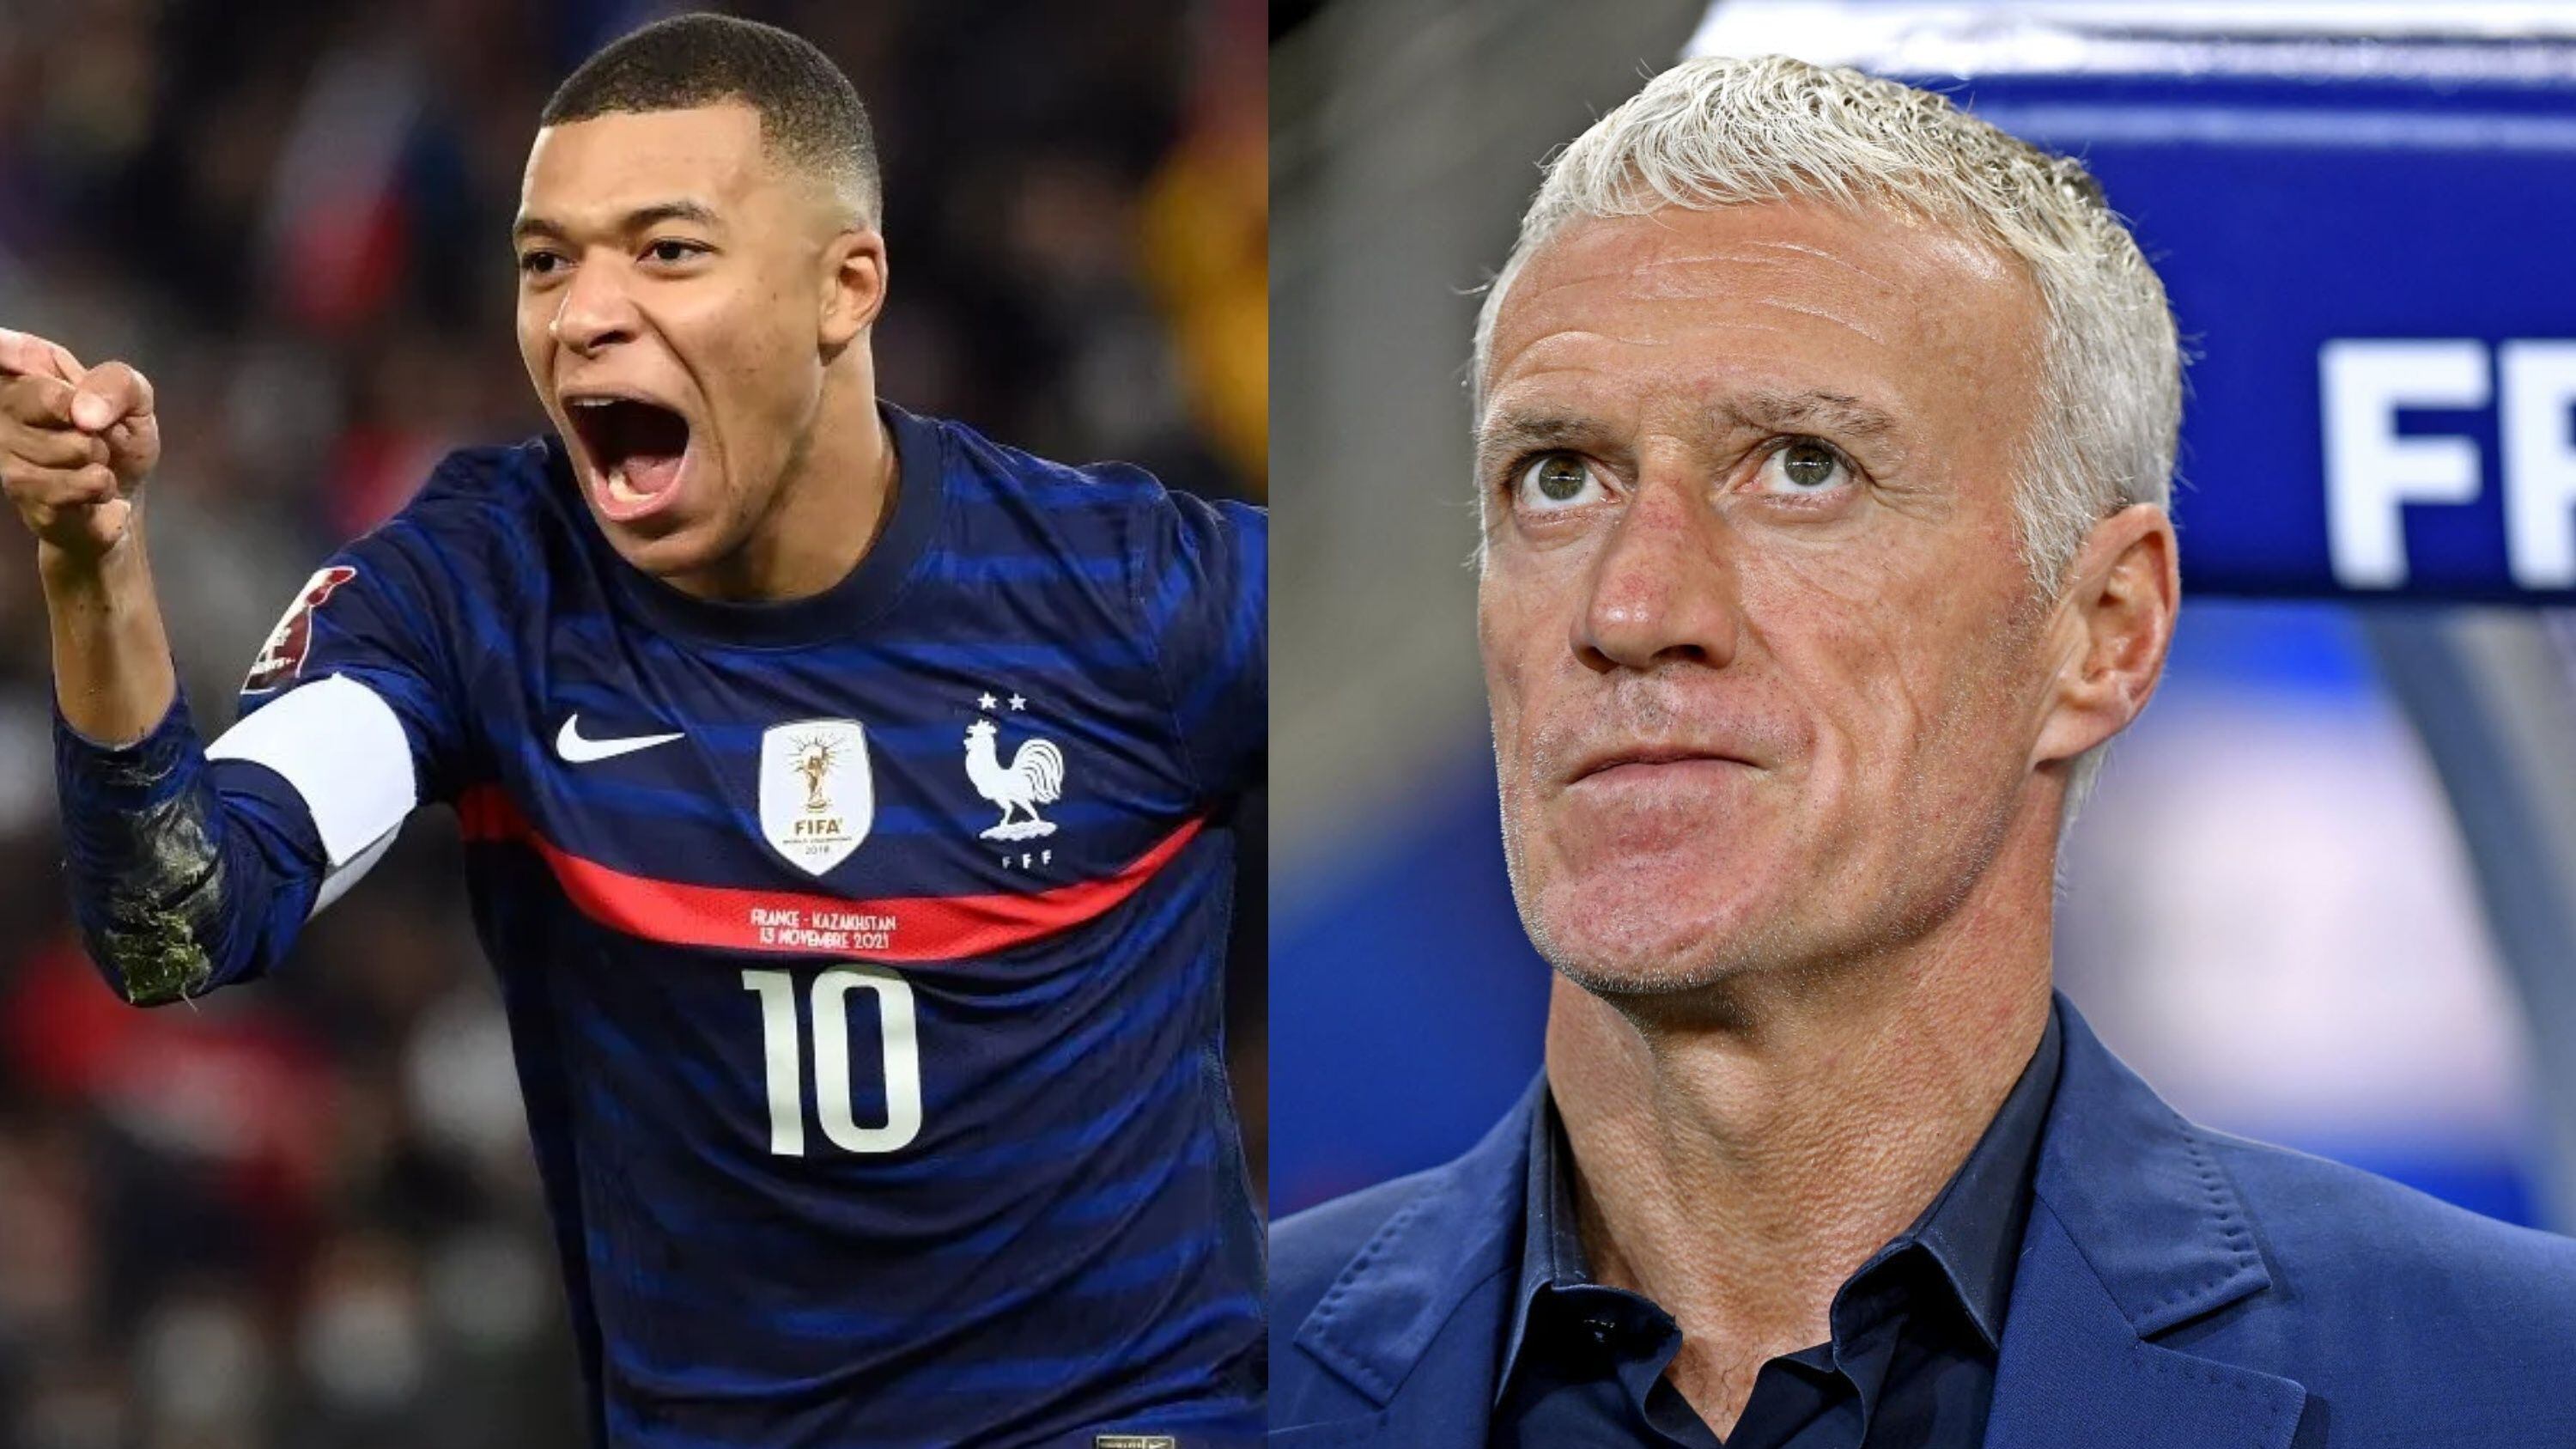 Mbappe and the message wich he states that he is not on the same level with his French teammates